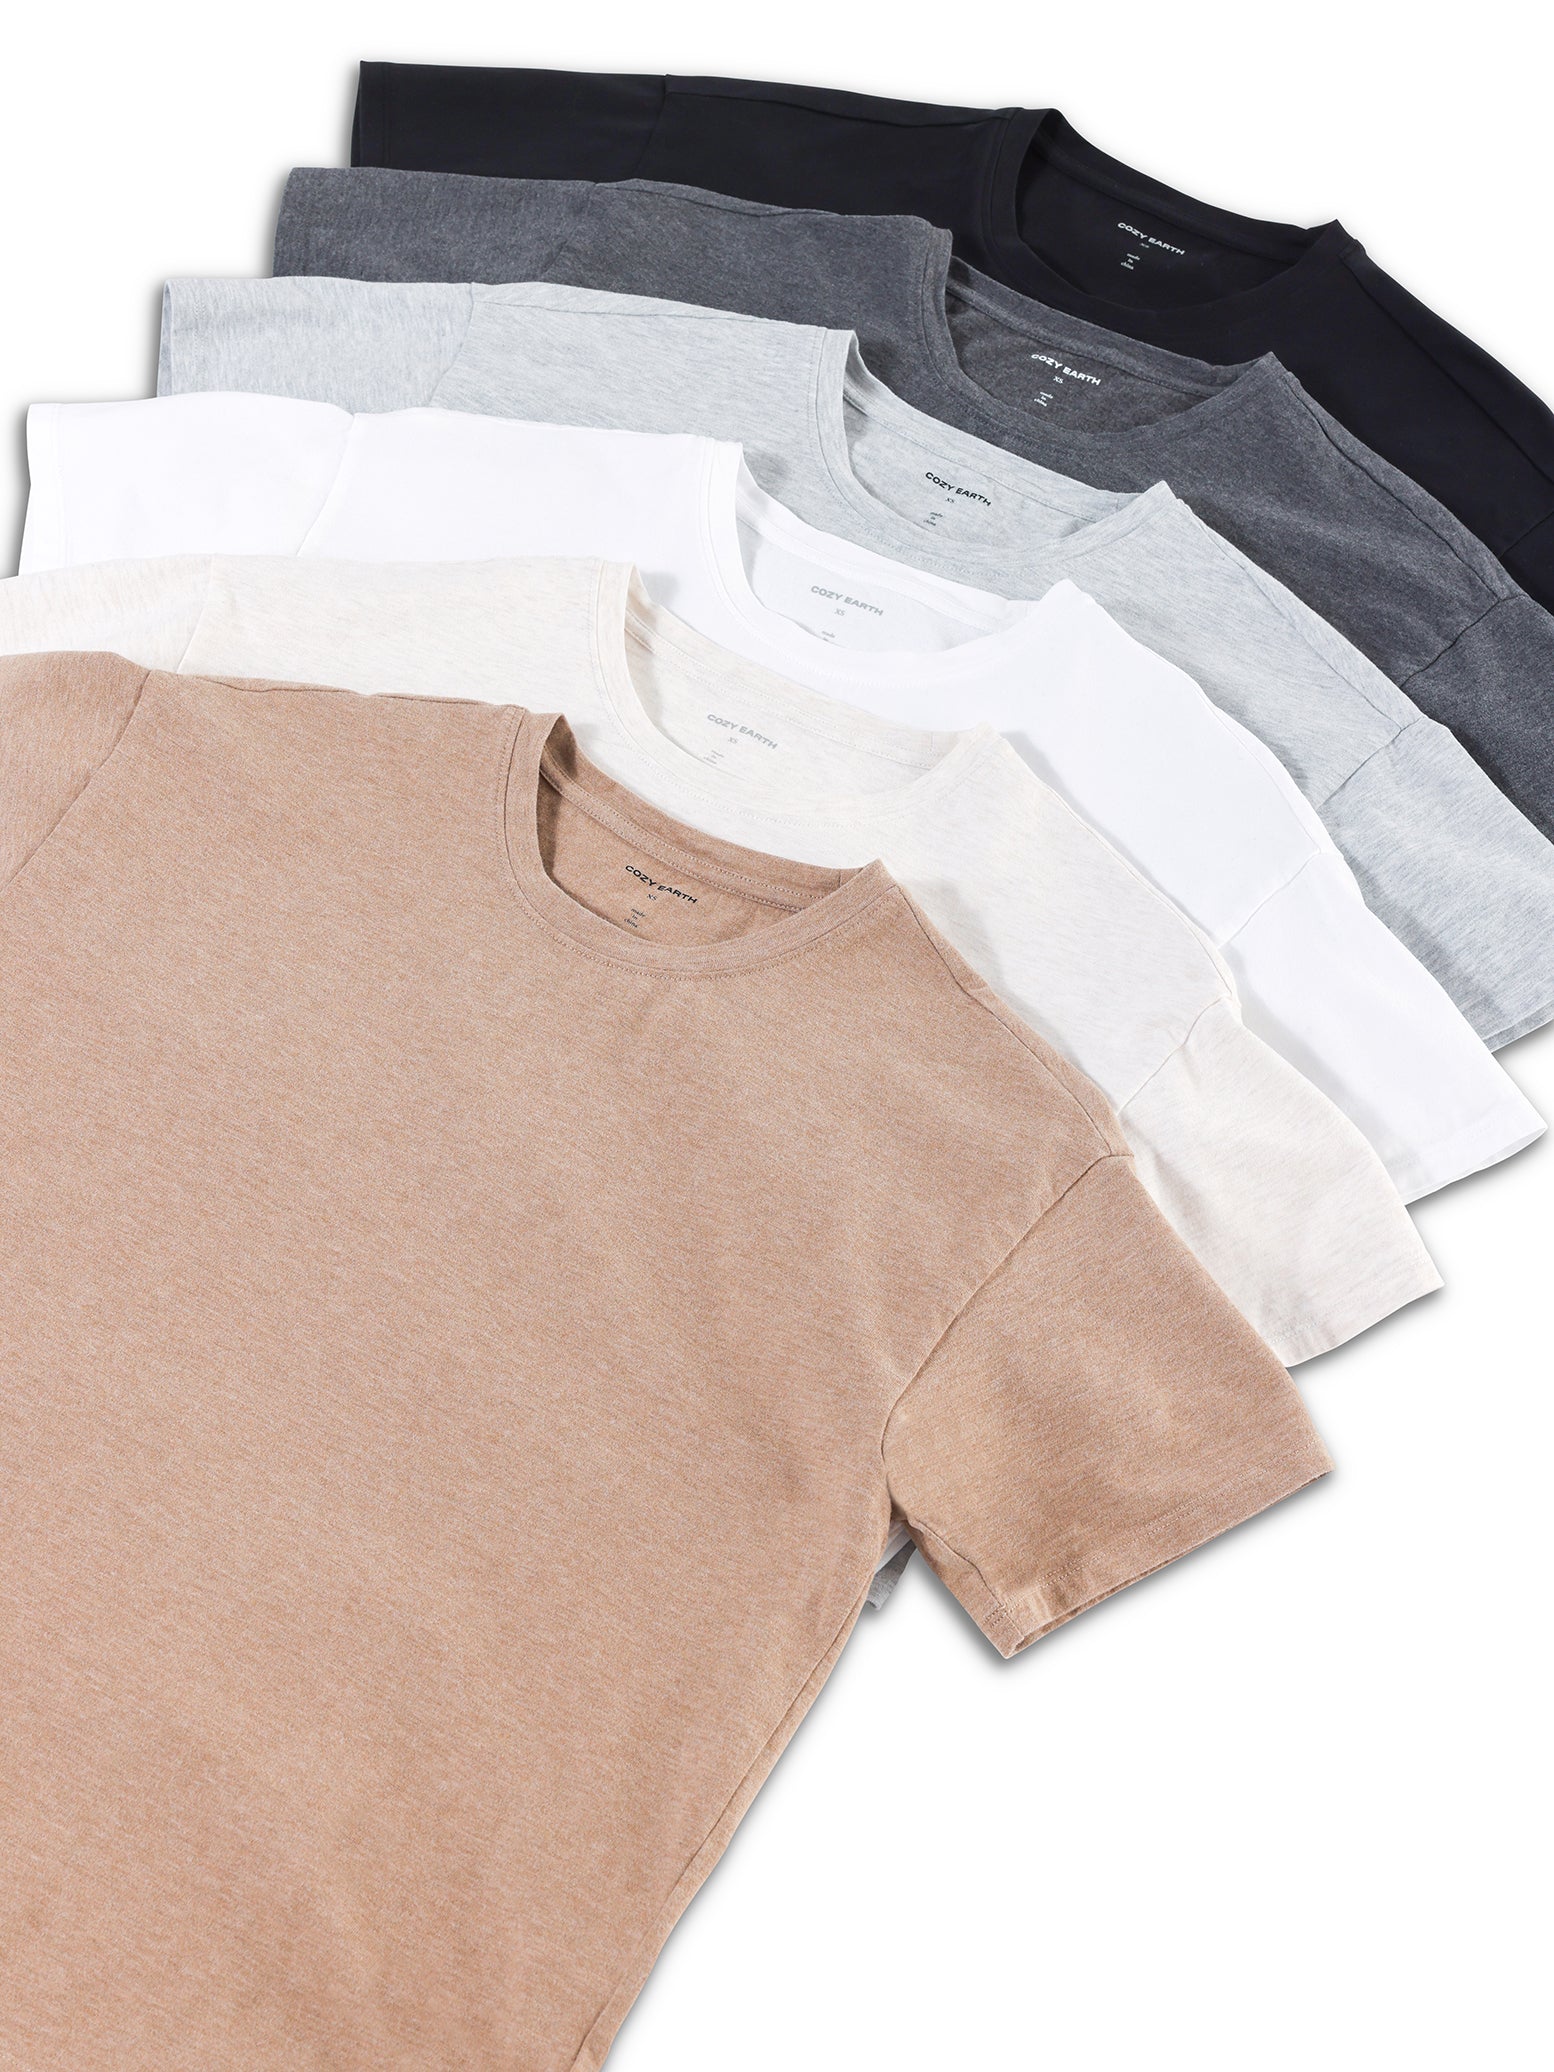 Coal Heather, Alabaster Heather, Beech Heather, White, Jet Black, and French Dove Heather tee shirt flat lays